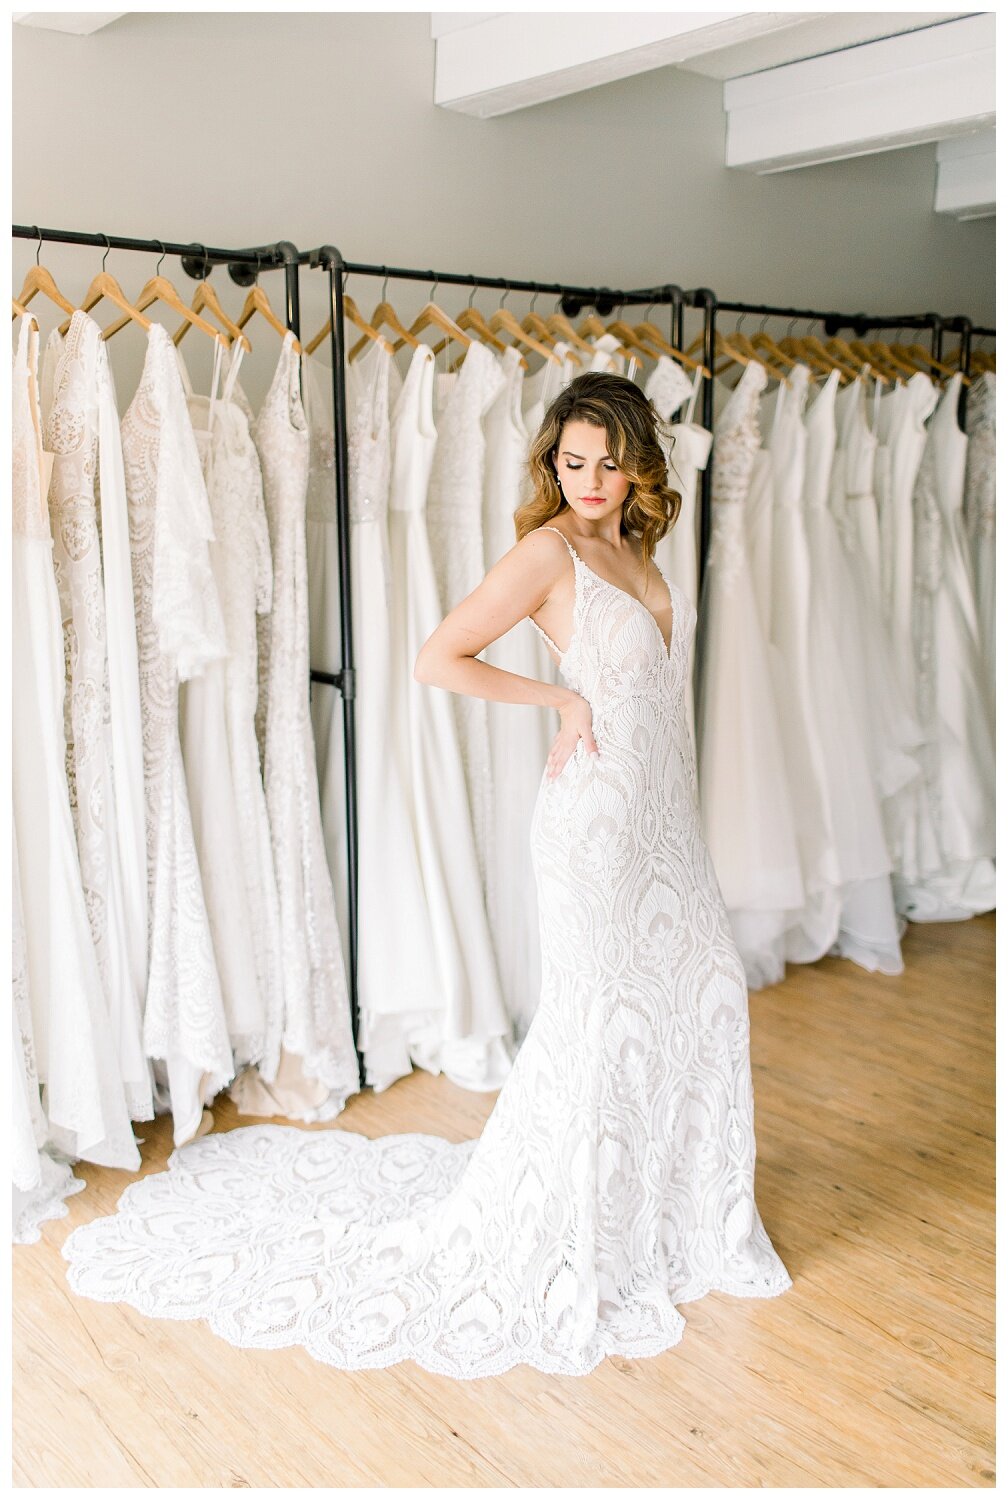 Discover more than 130 bridal gowns kansas city latest